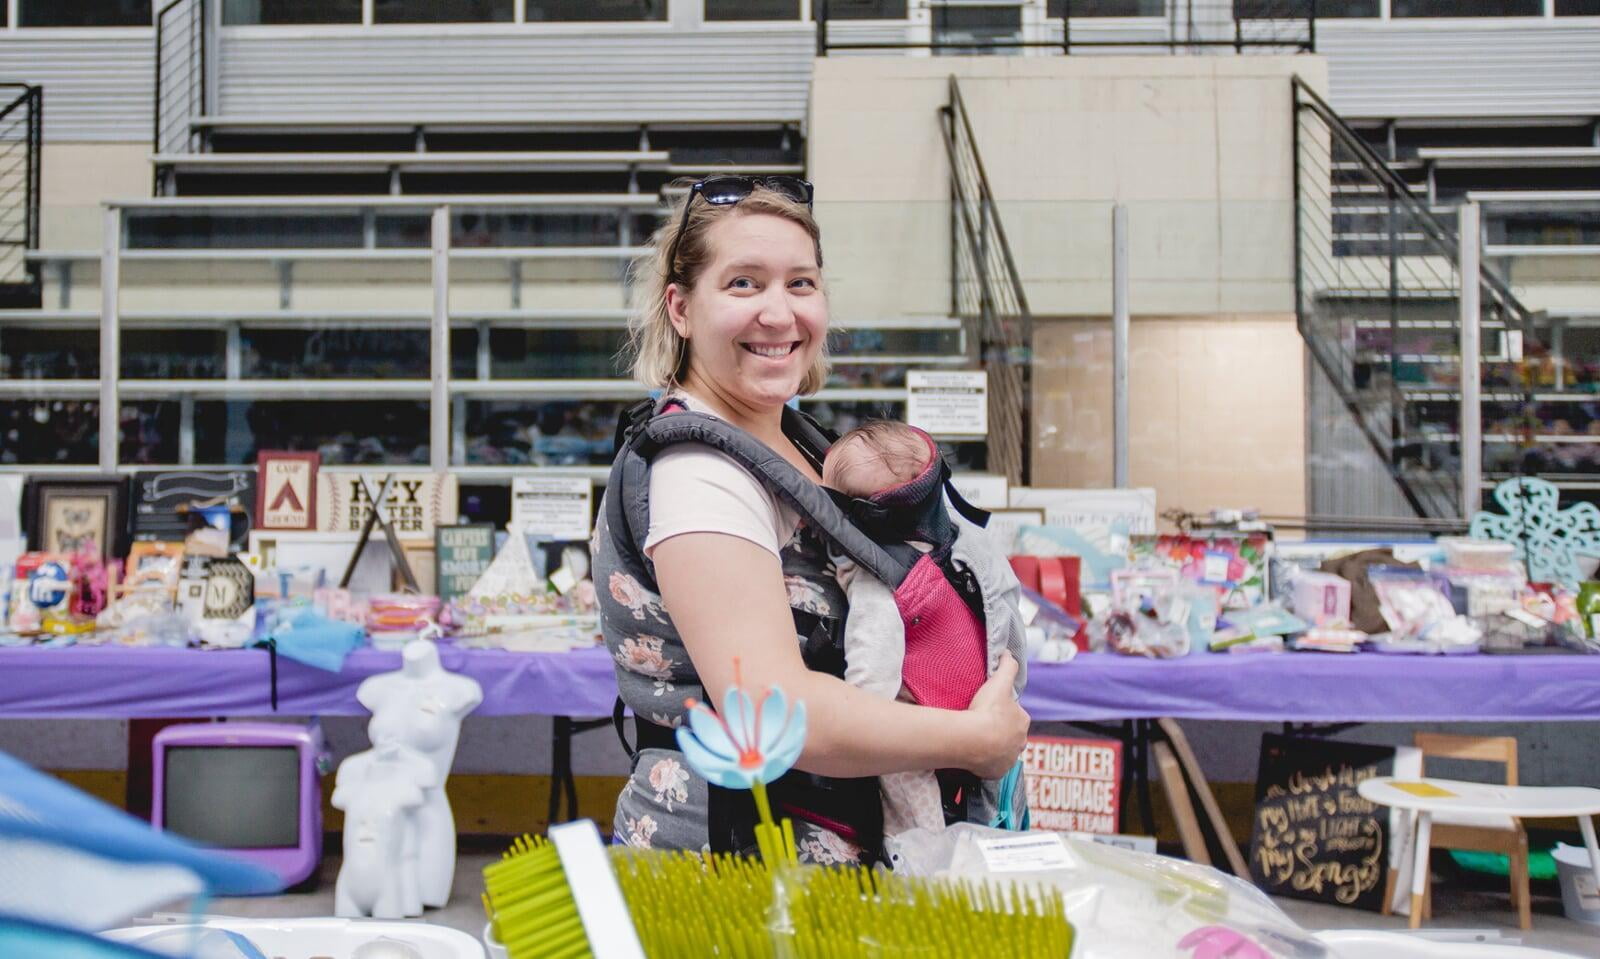 Two masked moms—one holding a child with a mask, the other pregnant—shop for their families at the local JBF sale.